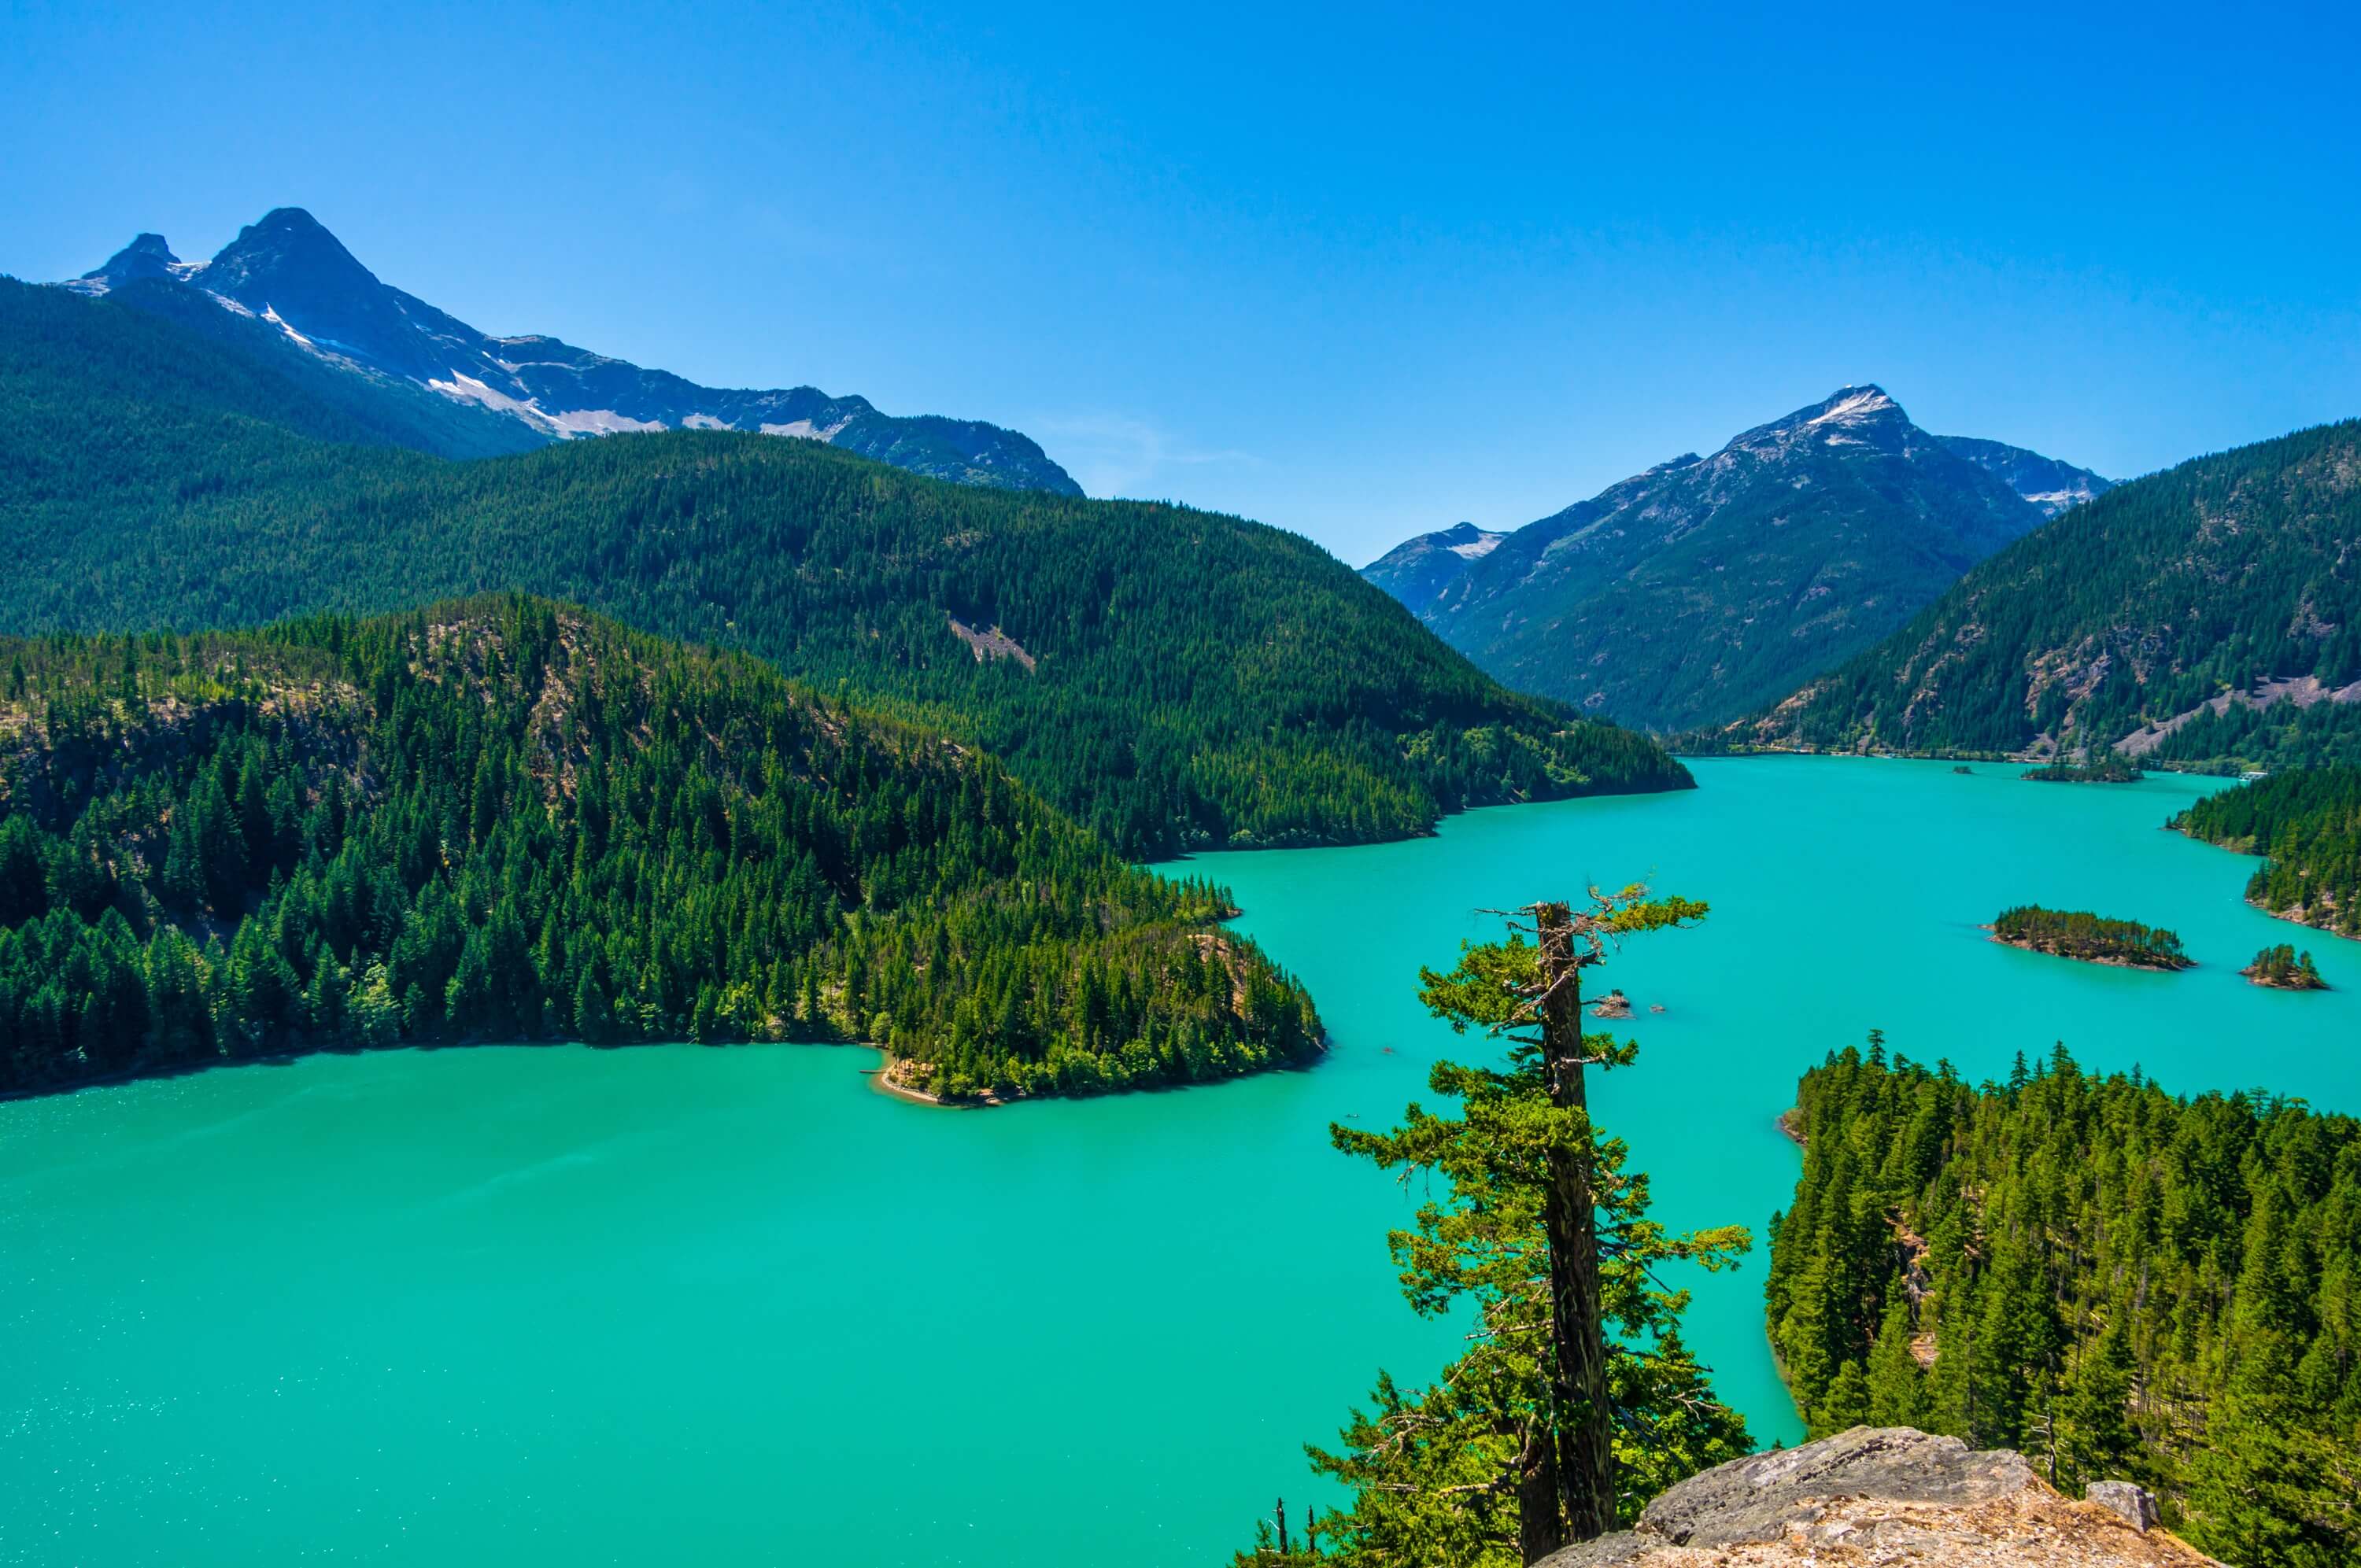 Explore Washington's Snow Capped Cascade Mountains | Visitor's Guide by